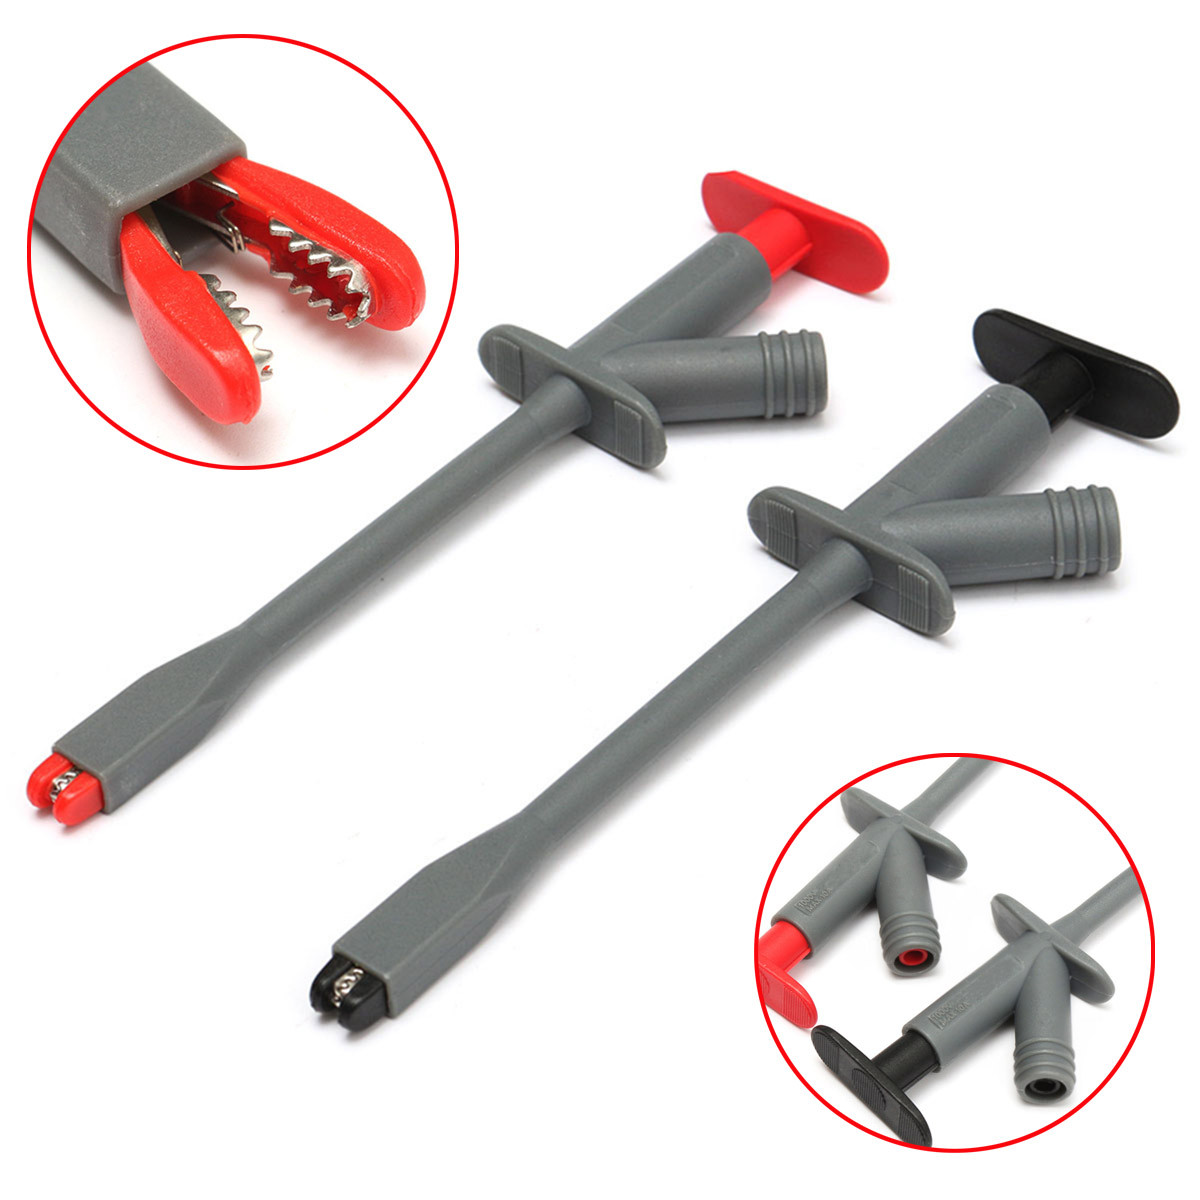 

2Pcs Safety Alligator Test Clip with 4mm Socket Connection Flexible Spring Jaw Opening